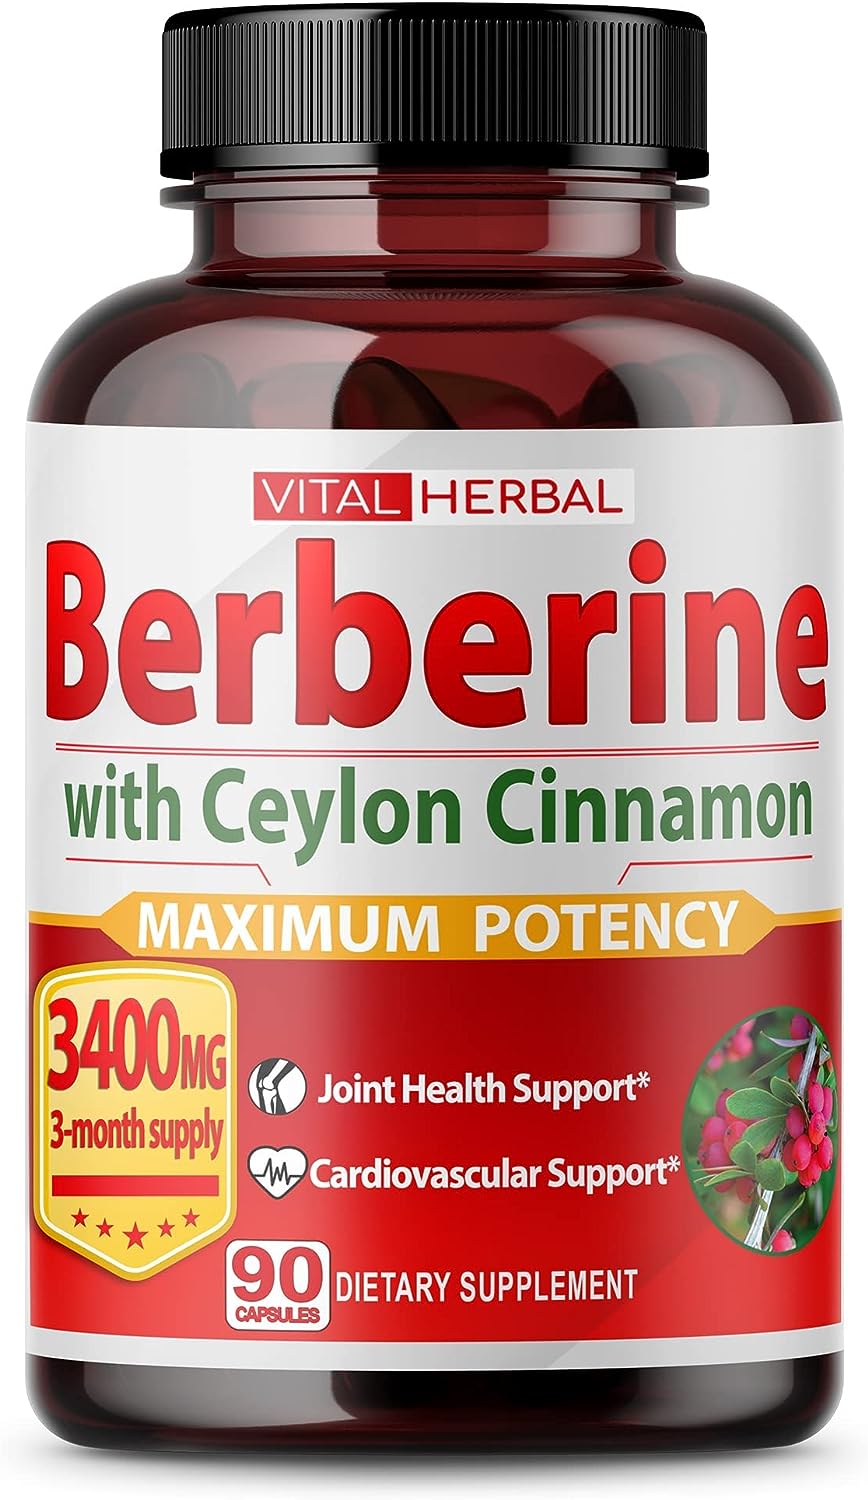 VITAL HERBAL Berberine with Ceylon Cinnamon Capsules Equivalent to 3400 mg Maximum Potency with Gymnema Sylvestre Ashwagandha Black Pepper - Glucose Metabolism Support - 90 Days Supply